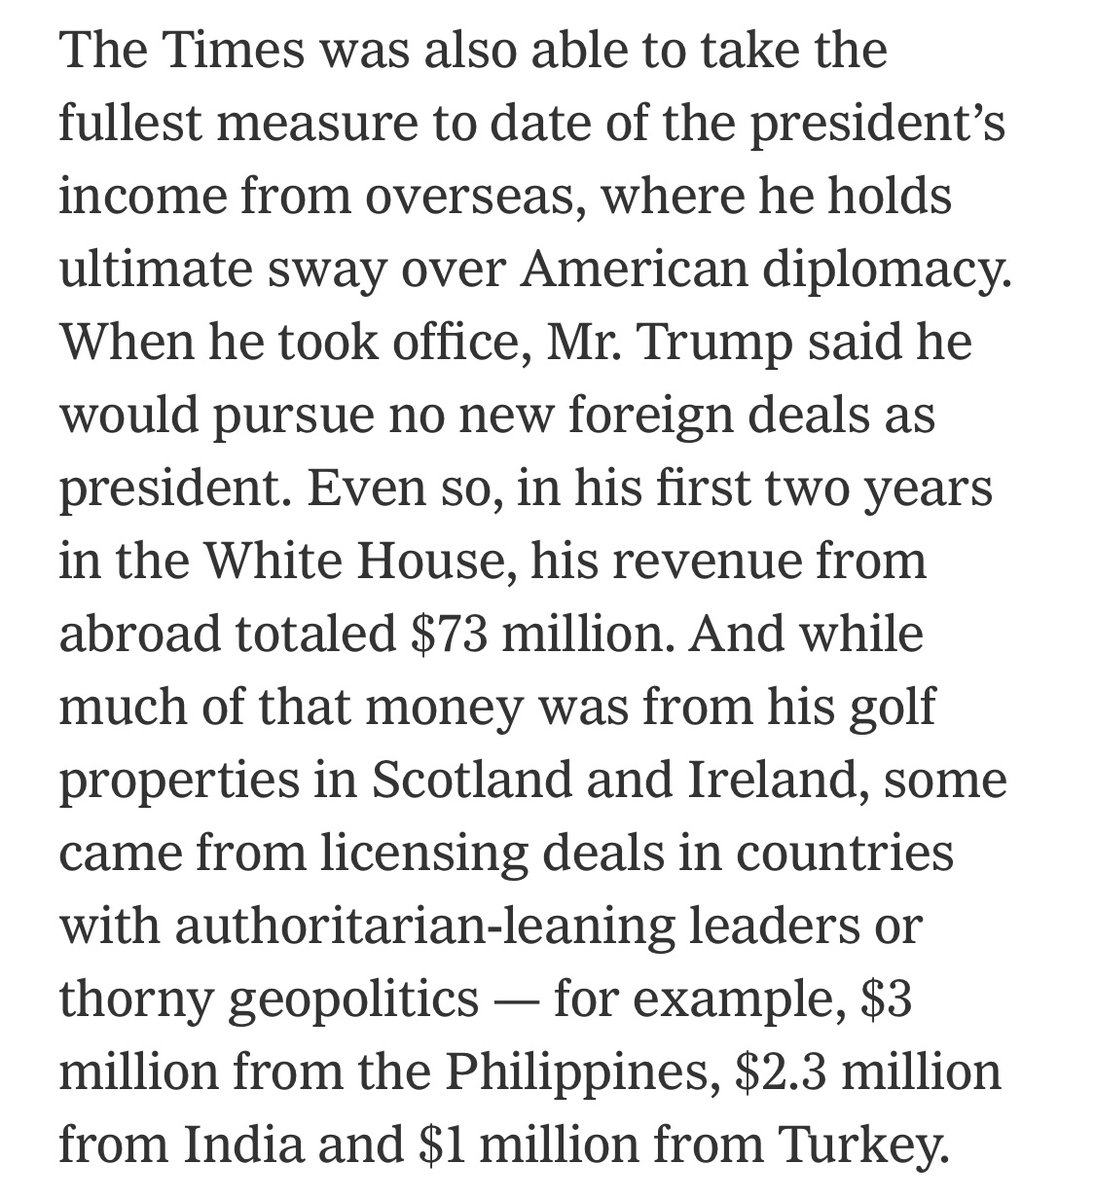 Trump made $73 million from foreign sources in his first two years in the White House, including millions in licensing deals in the Philippines, India, and Turkey: